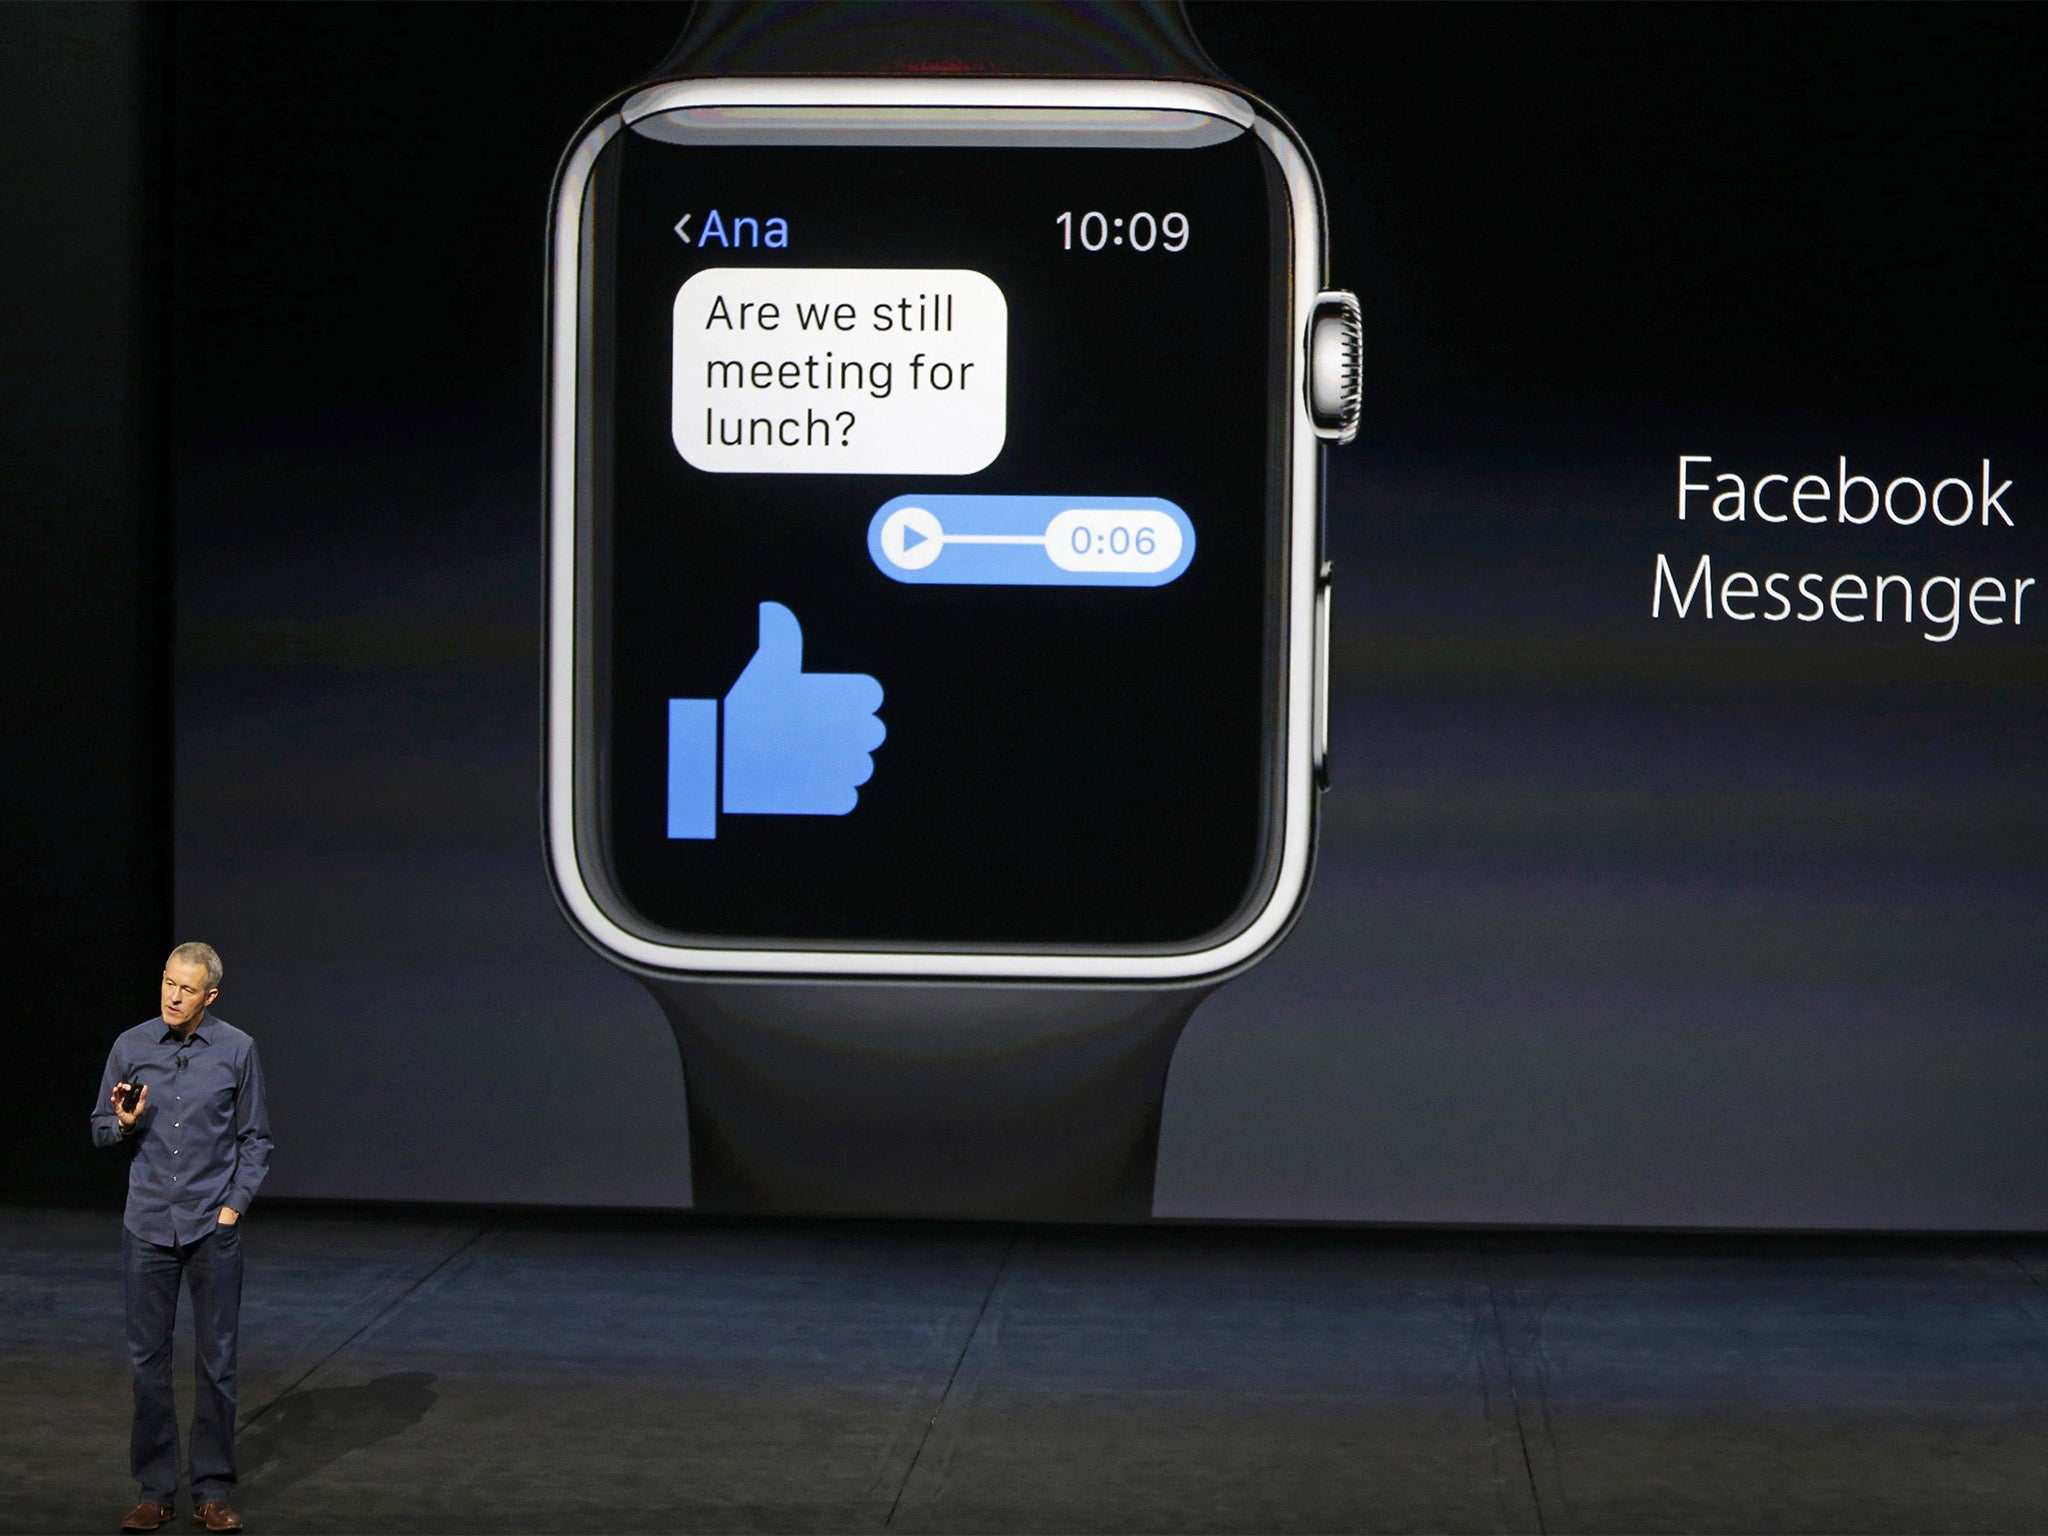 Jeff Williams, Apple's senior vice president of Operations, speaks about the Apple Watch and Facebook Messenger